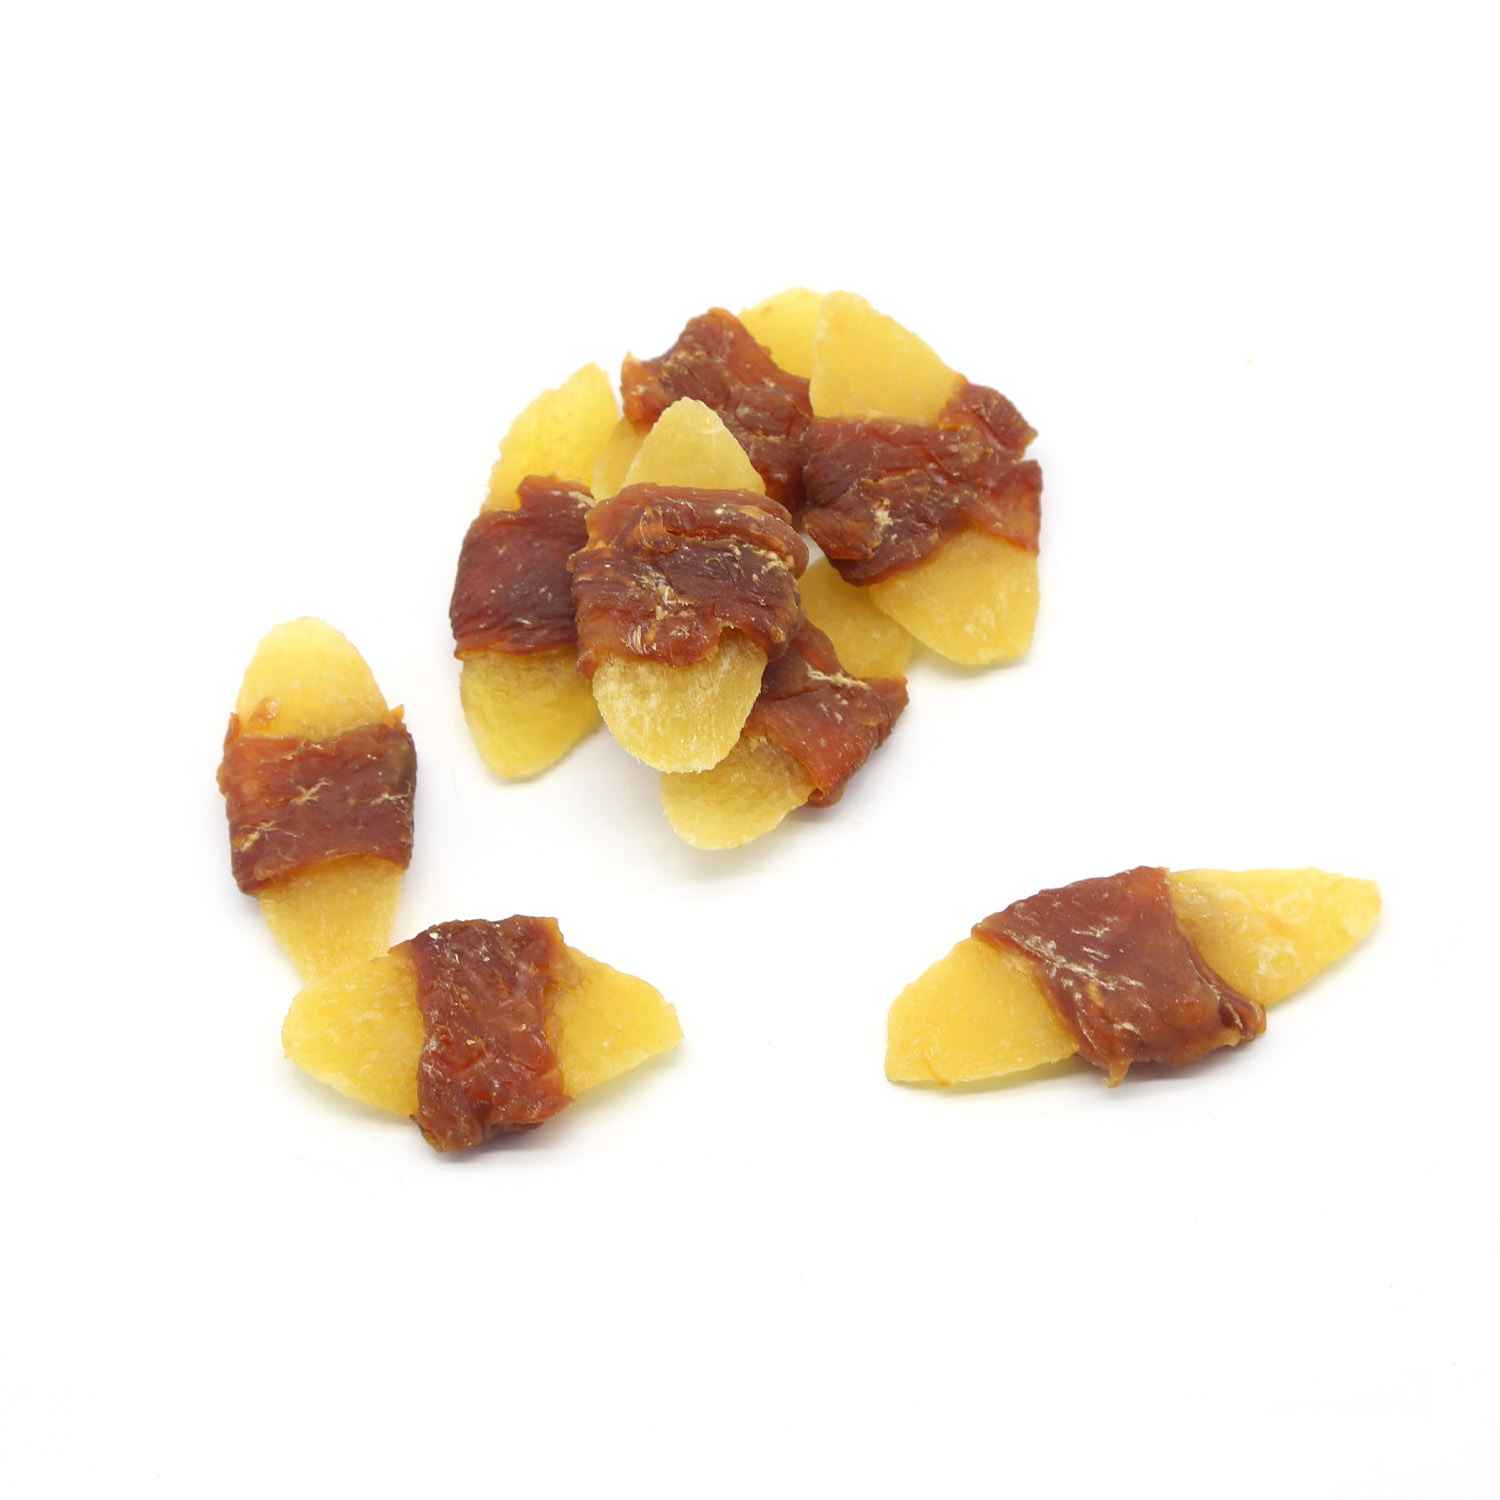 OEM dog chew treats pineapple wrapped with duck breast meat